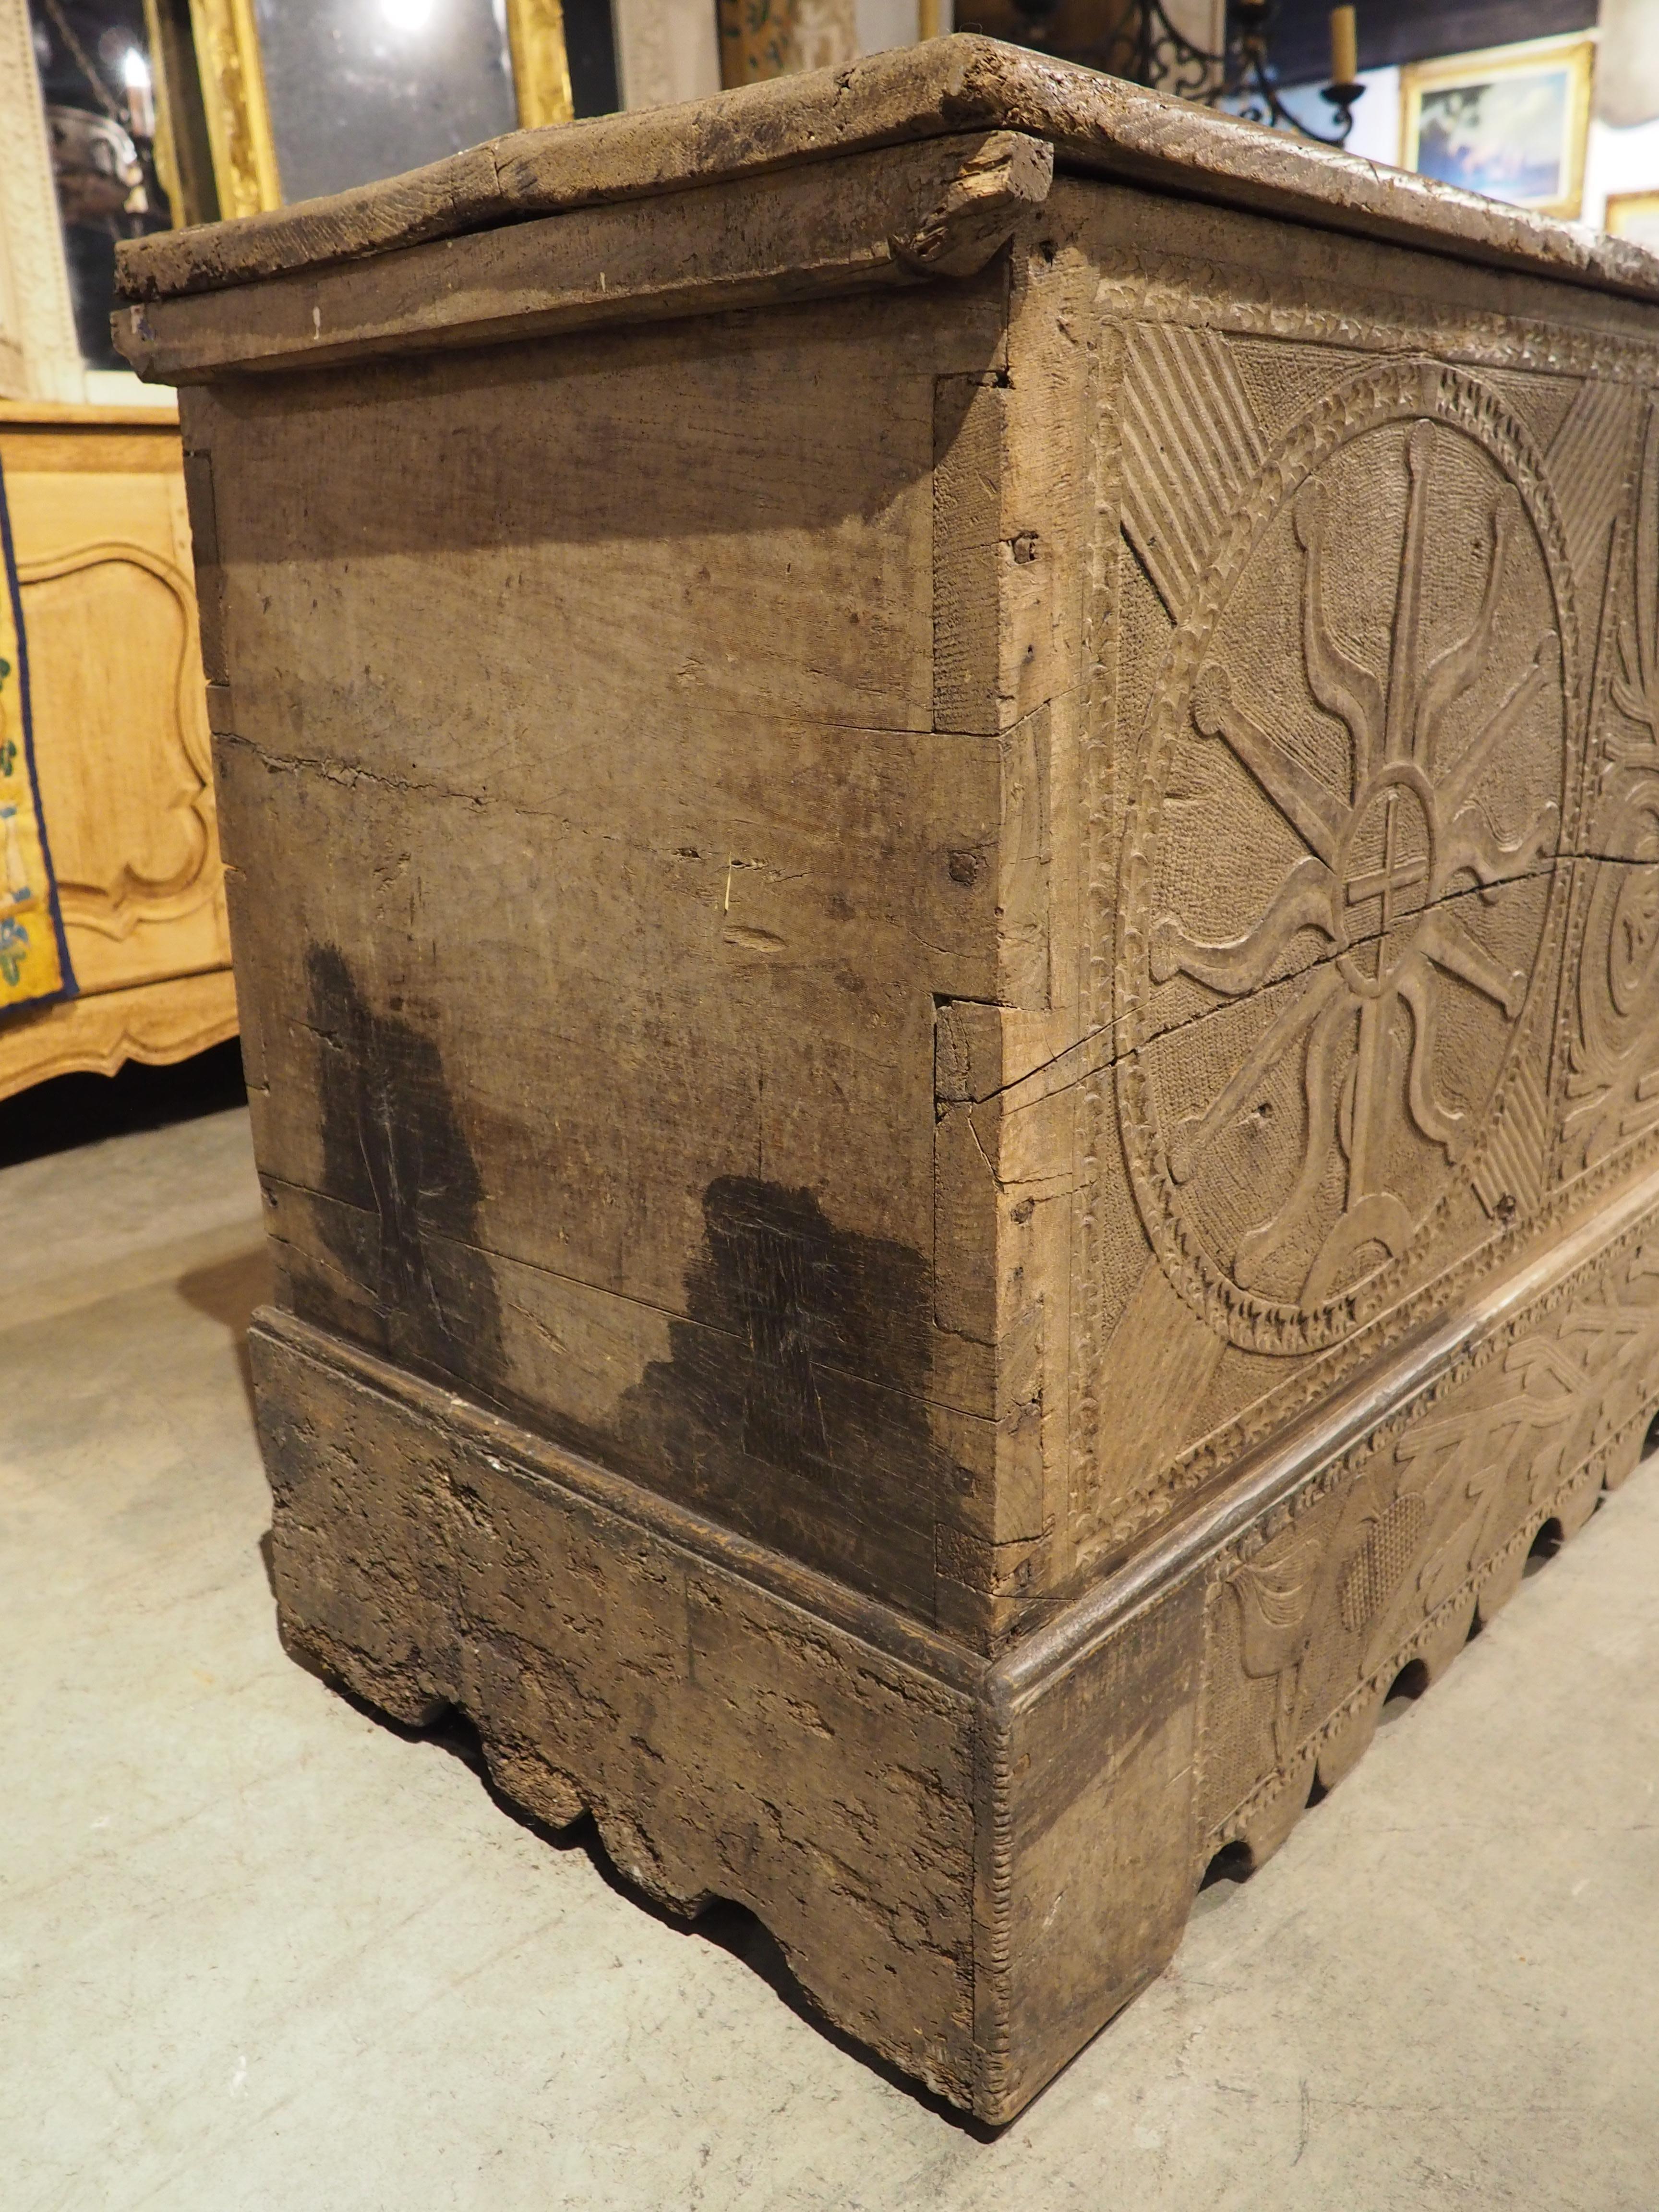 Huge Antique Carved Oak Chest or Trunk from Spain, Late 1500s to Early 1600s 4